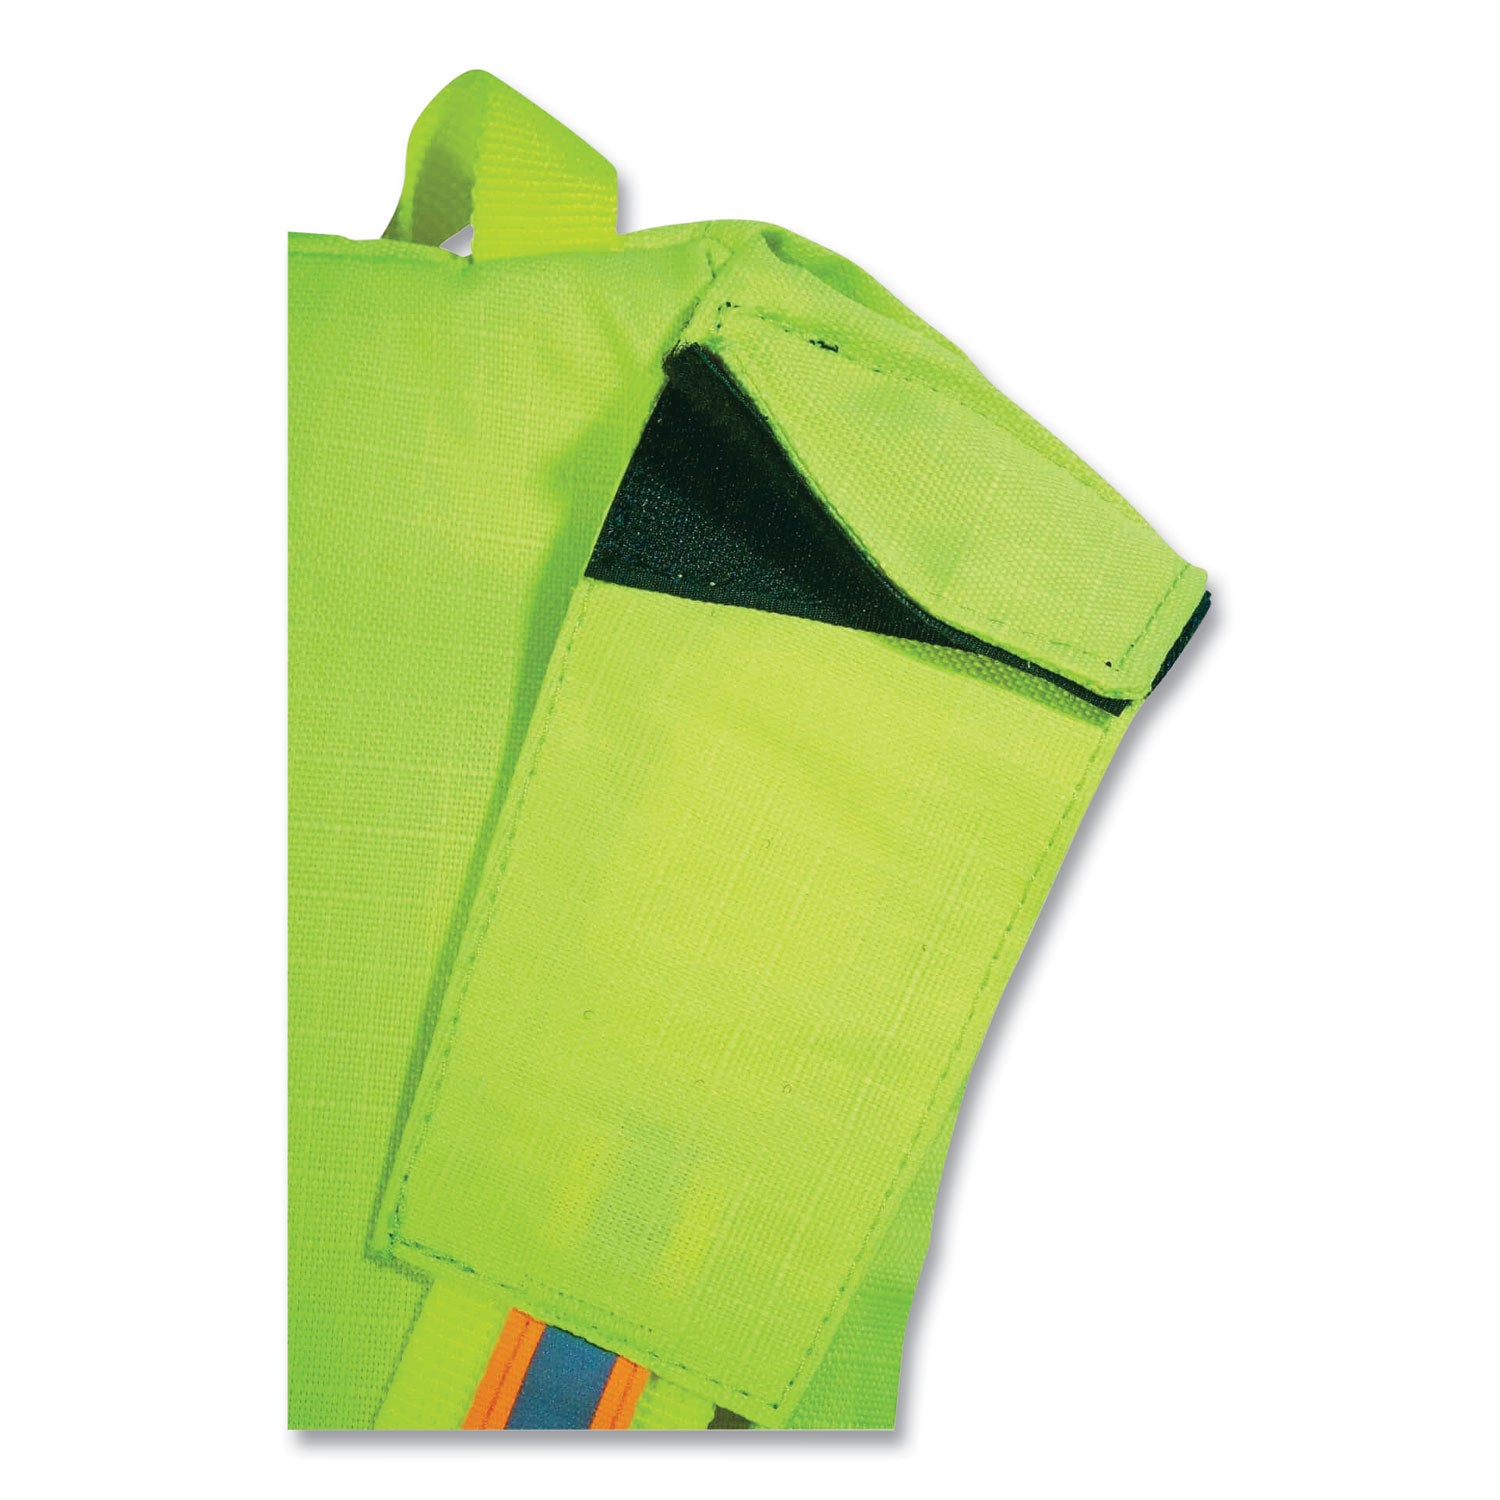 chill-its-5155-low-profile-hydration-pack-2-l-hi-vis-lime-ships-in-1-3-business-days_ego13156 - 4